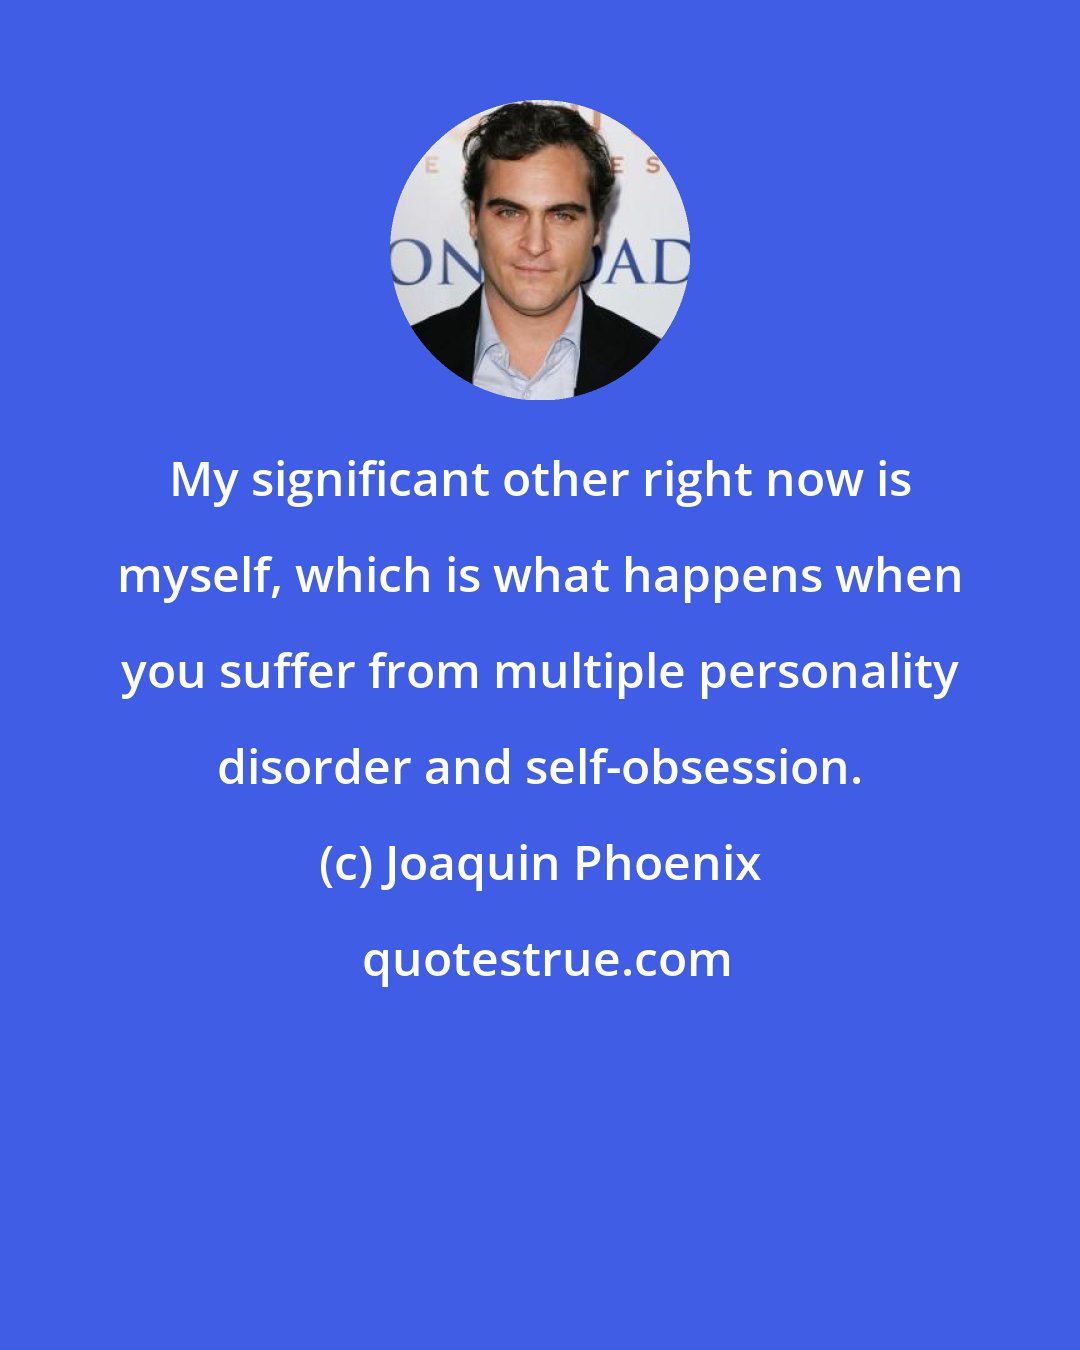 Joaquin Phoenix: My significant other right now is myself, which is what happens when you suffer from multiple personality disorder and self-obsession.